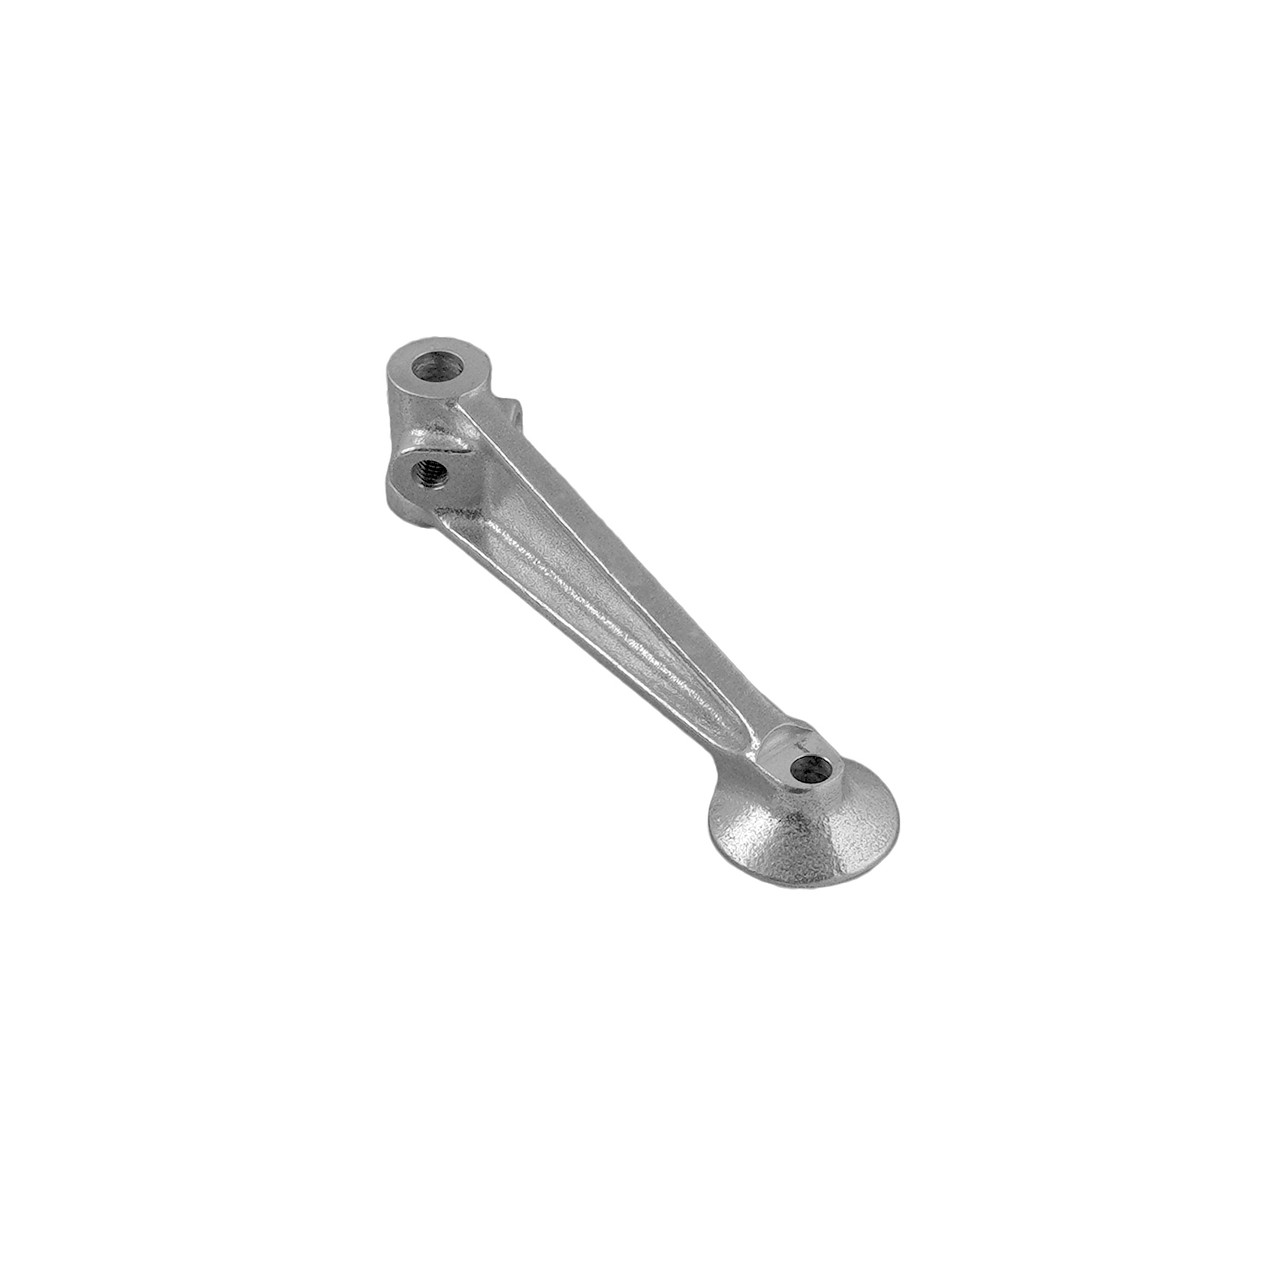 Knock Out Arm (Metal) For Hollymatic Patty Maker HOL061   2061